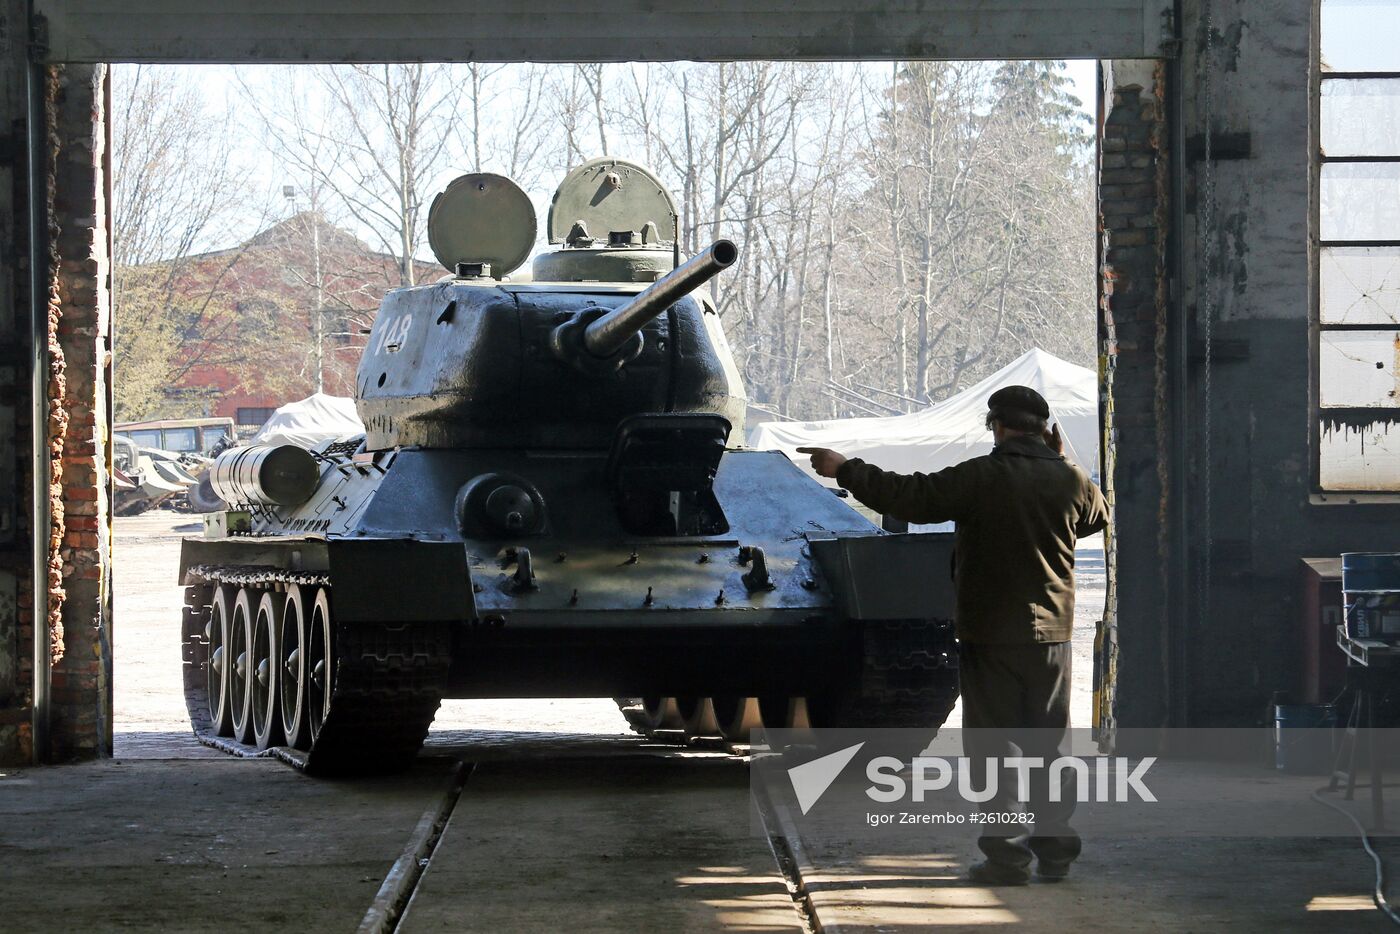 T-34 tank that stormed Königsberg restored for Victory Day